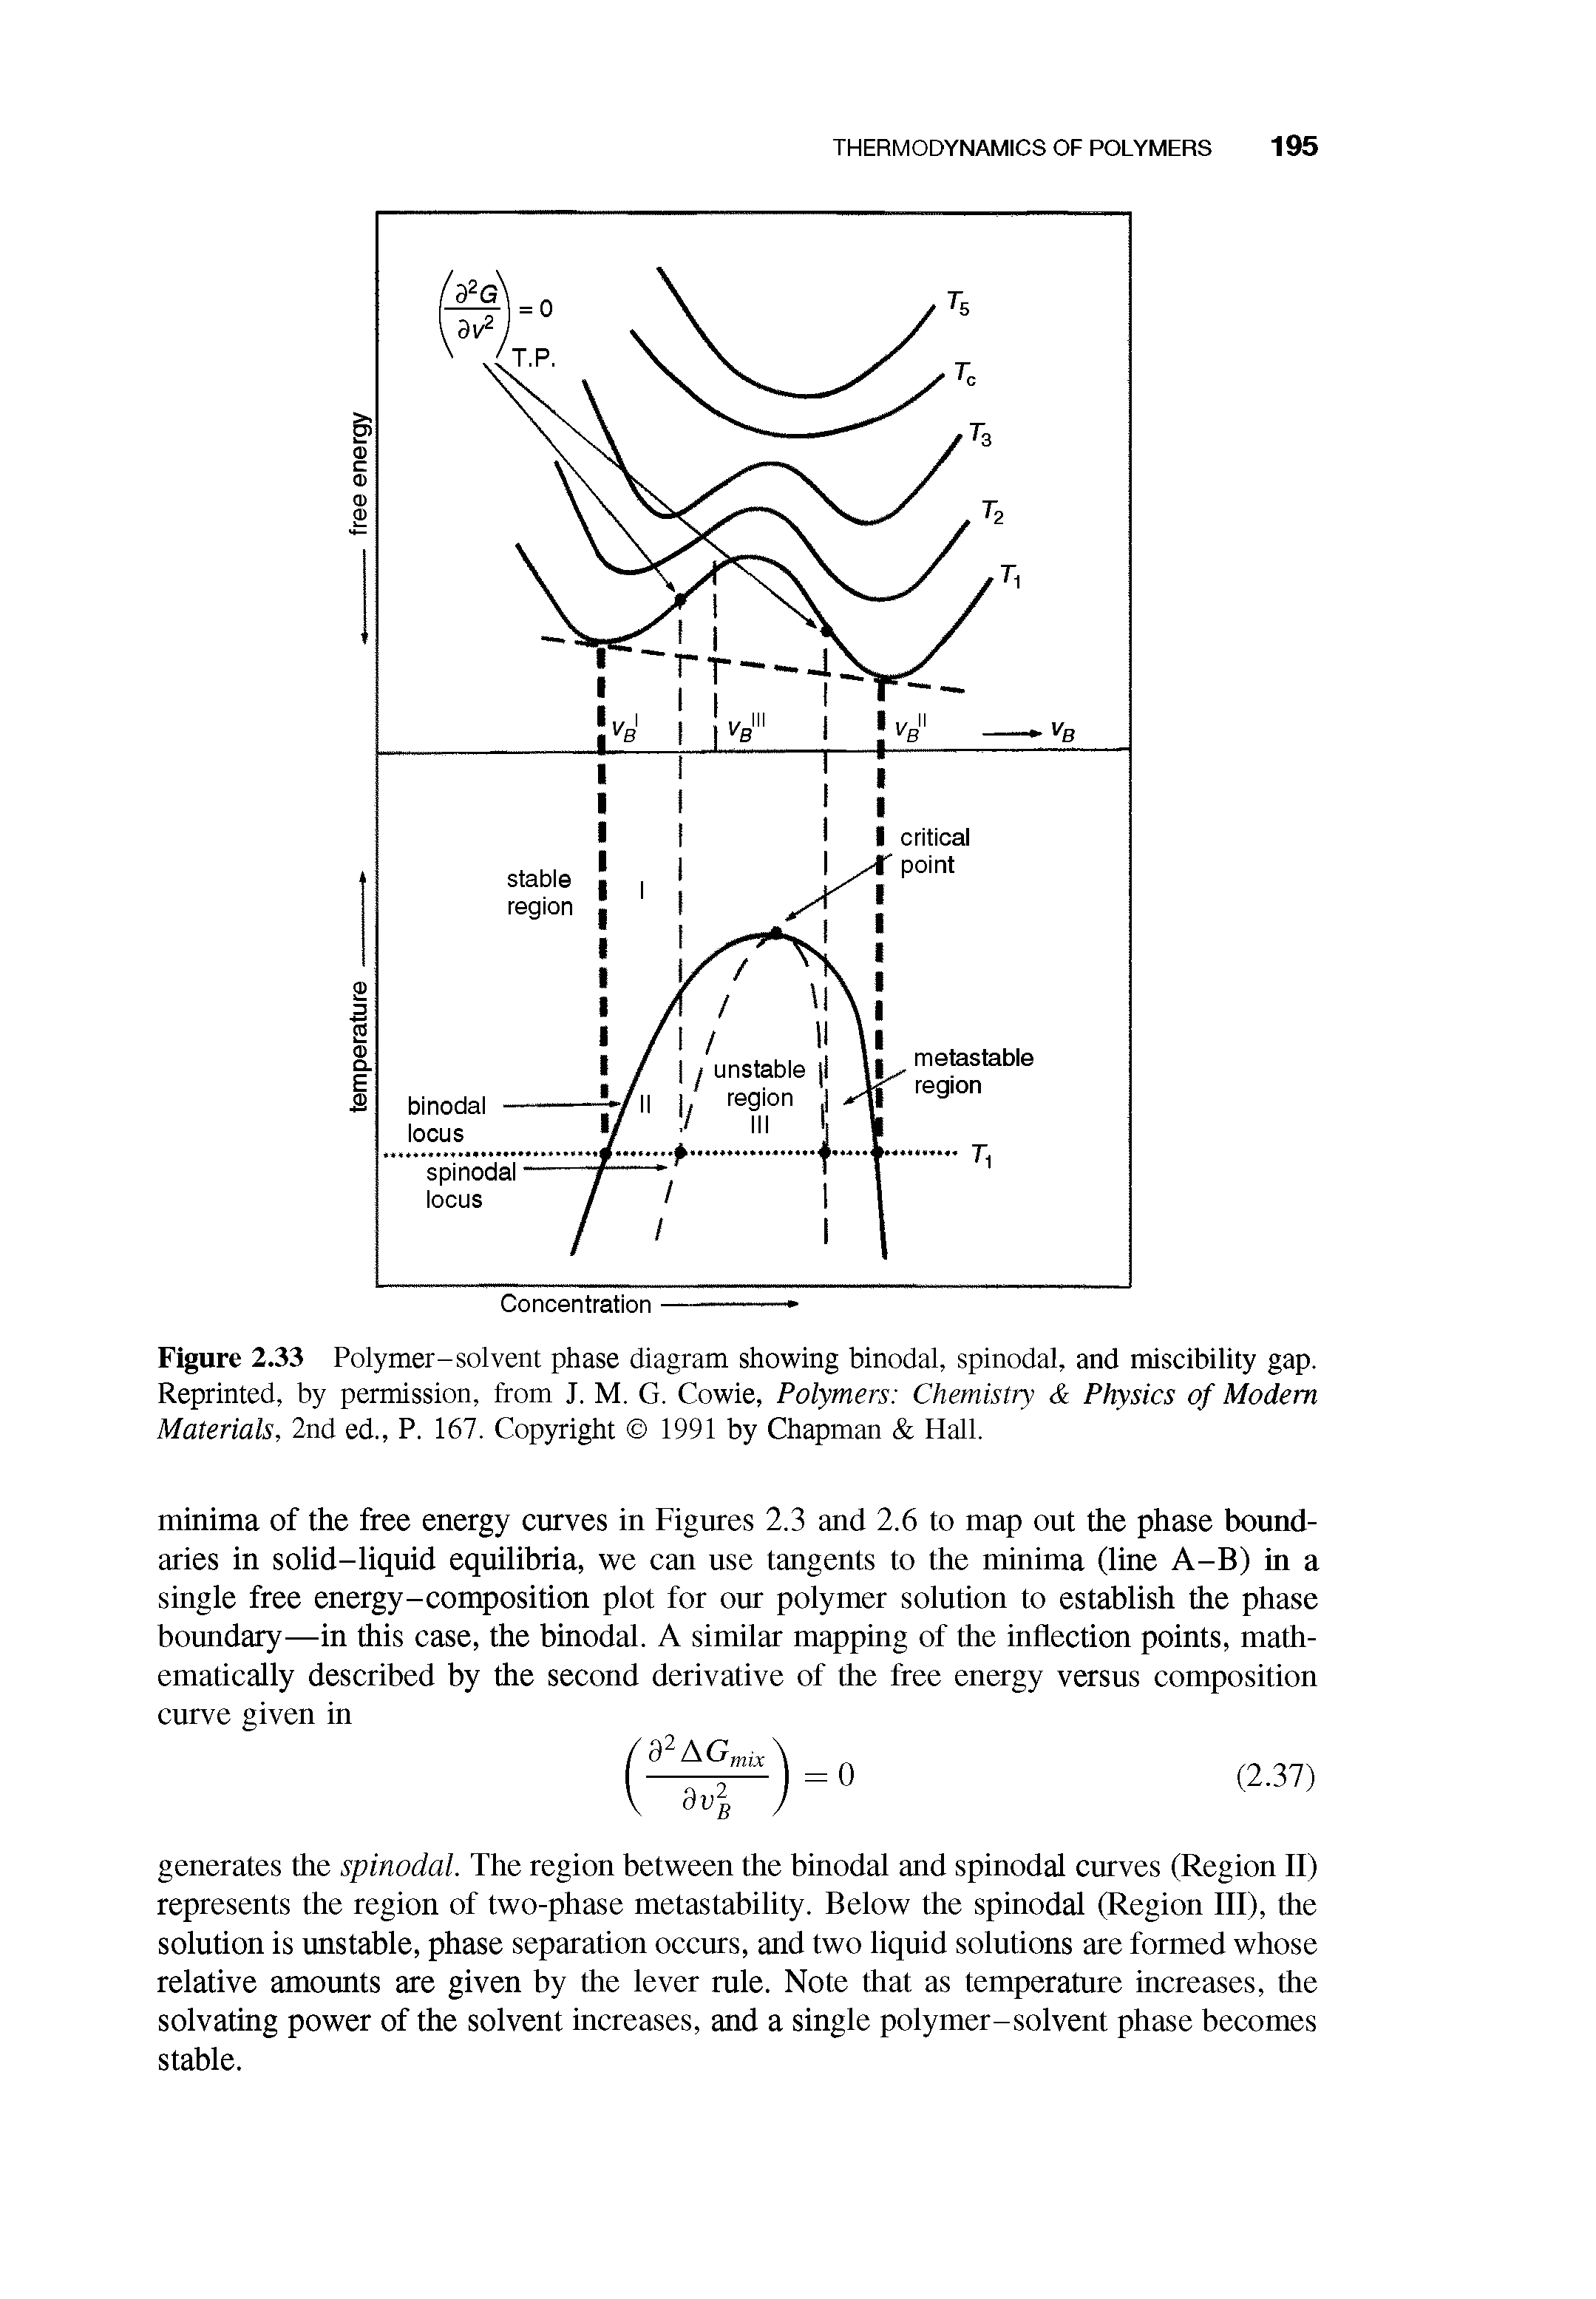 Figure 2.33 Polymer-solvent phase diagram showing binodal, spinodal, and miscibility gap. Reprinted, by permission, from J. M. G. Cowie, Polymers Chemistry Physics of Modem Materials, 2nd ed., P. 167. Copyright 1991 by Chapman Hall.